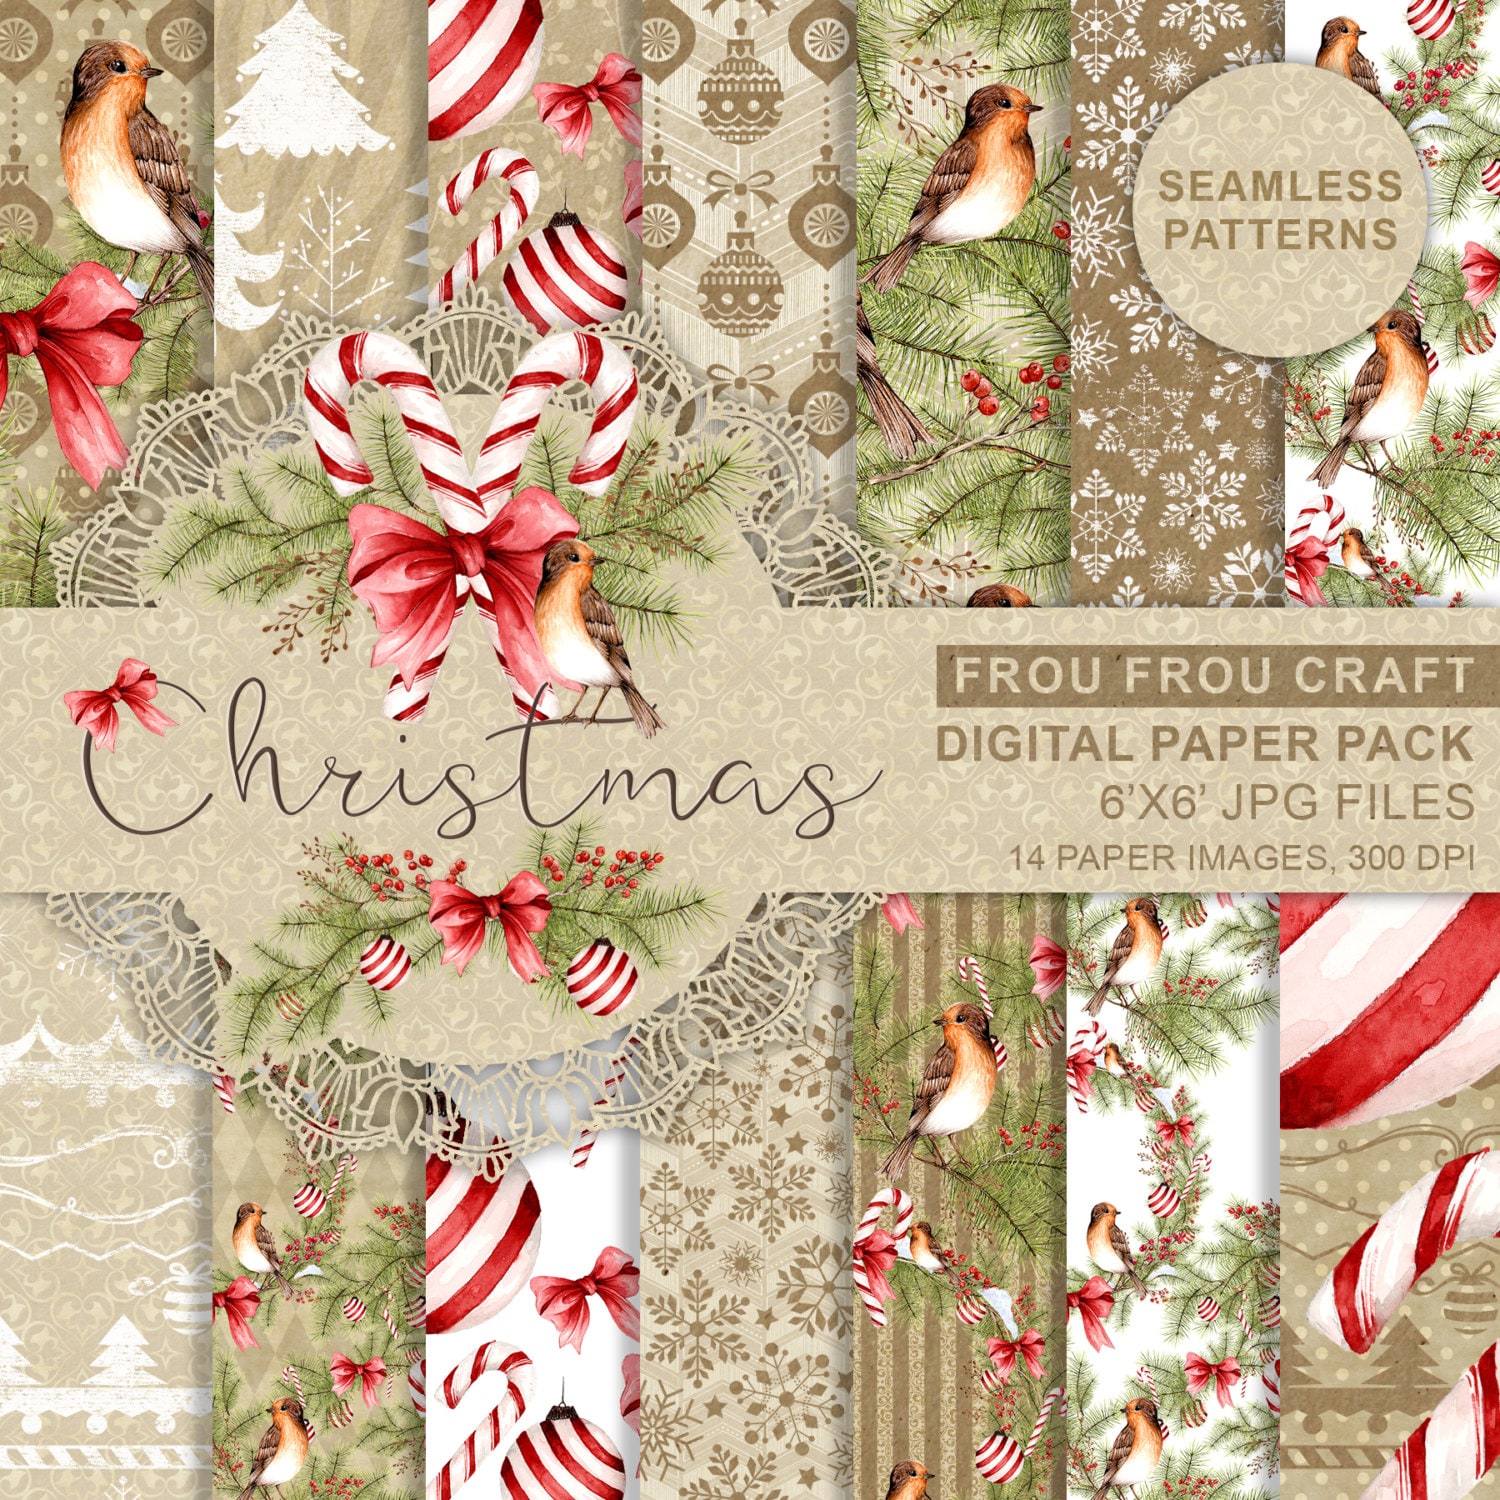 Christmas Paper Pack Xmas Scrapbook Paper Watercolor Digital Background  Seamless Patterns Candy Cane Printable Planner Supplies Cute Red Bow 